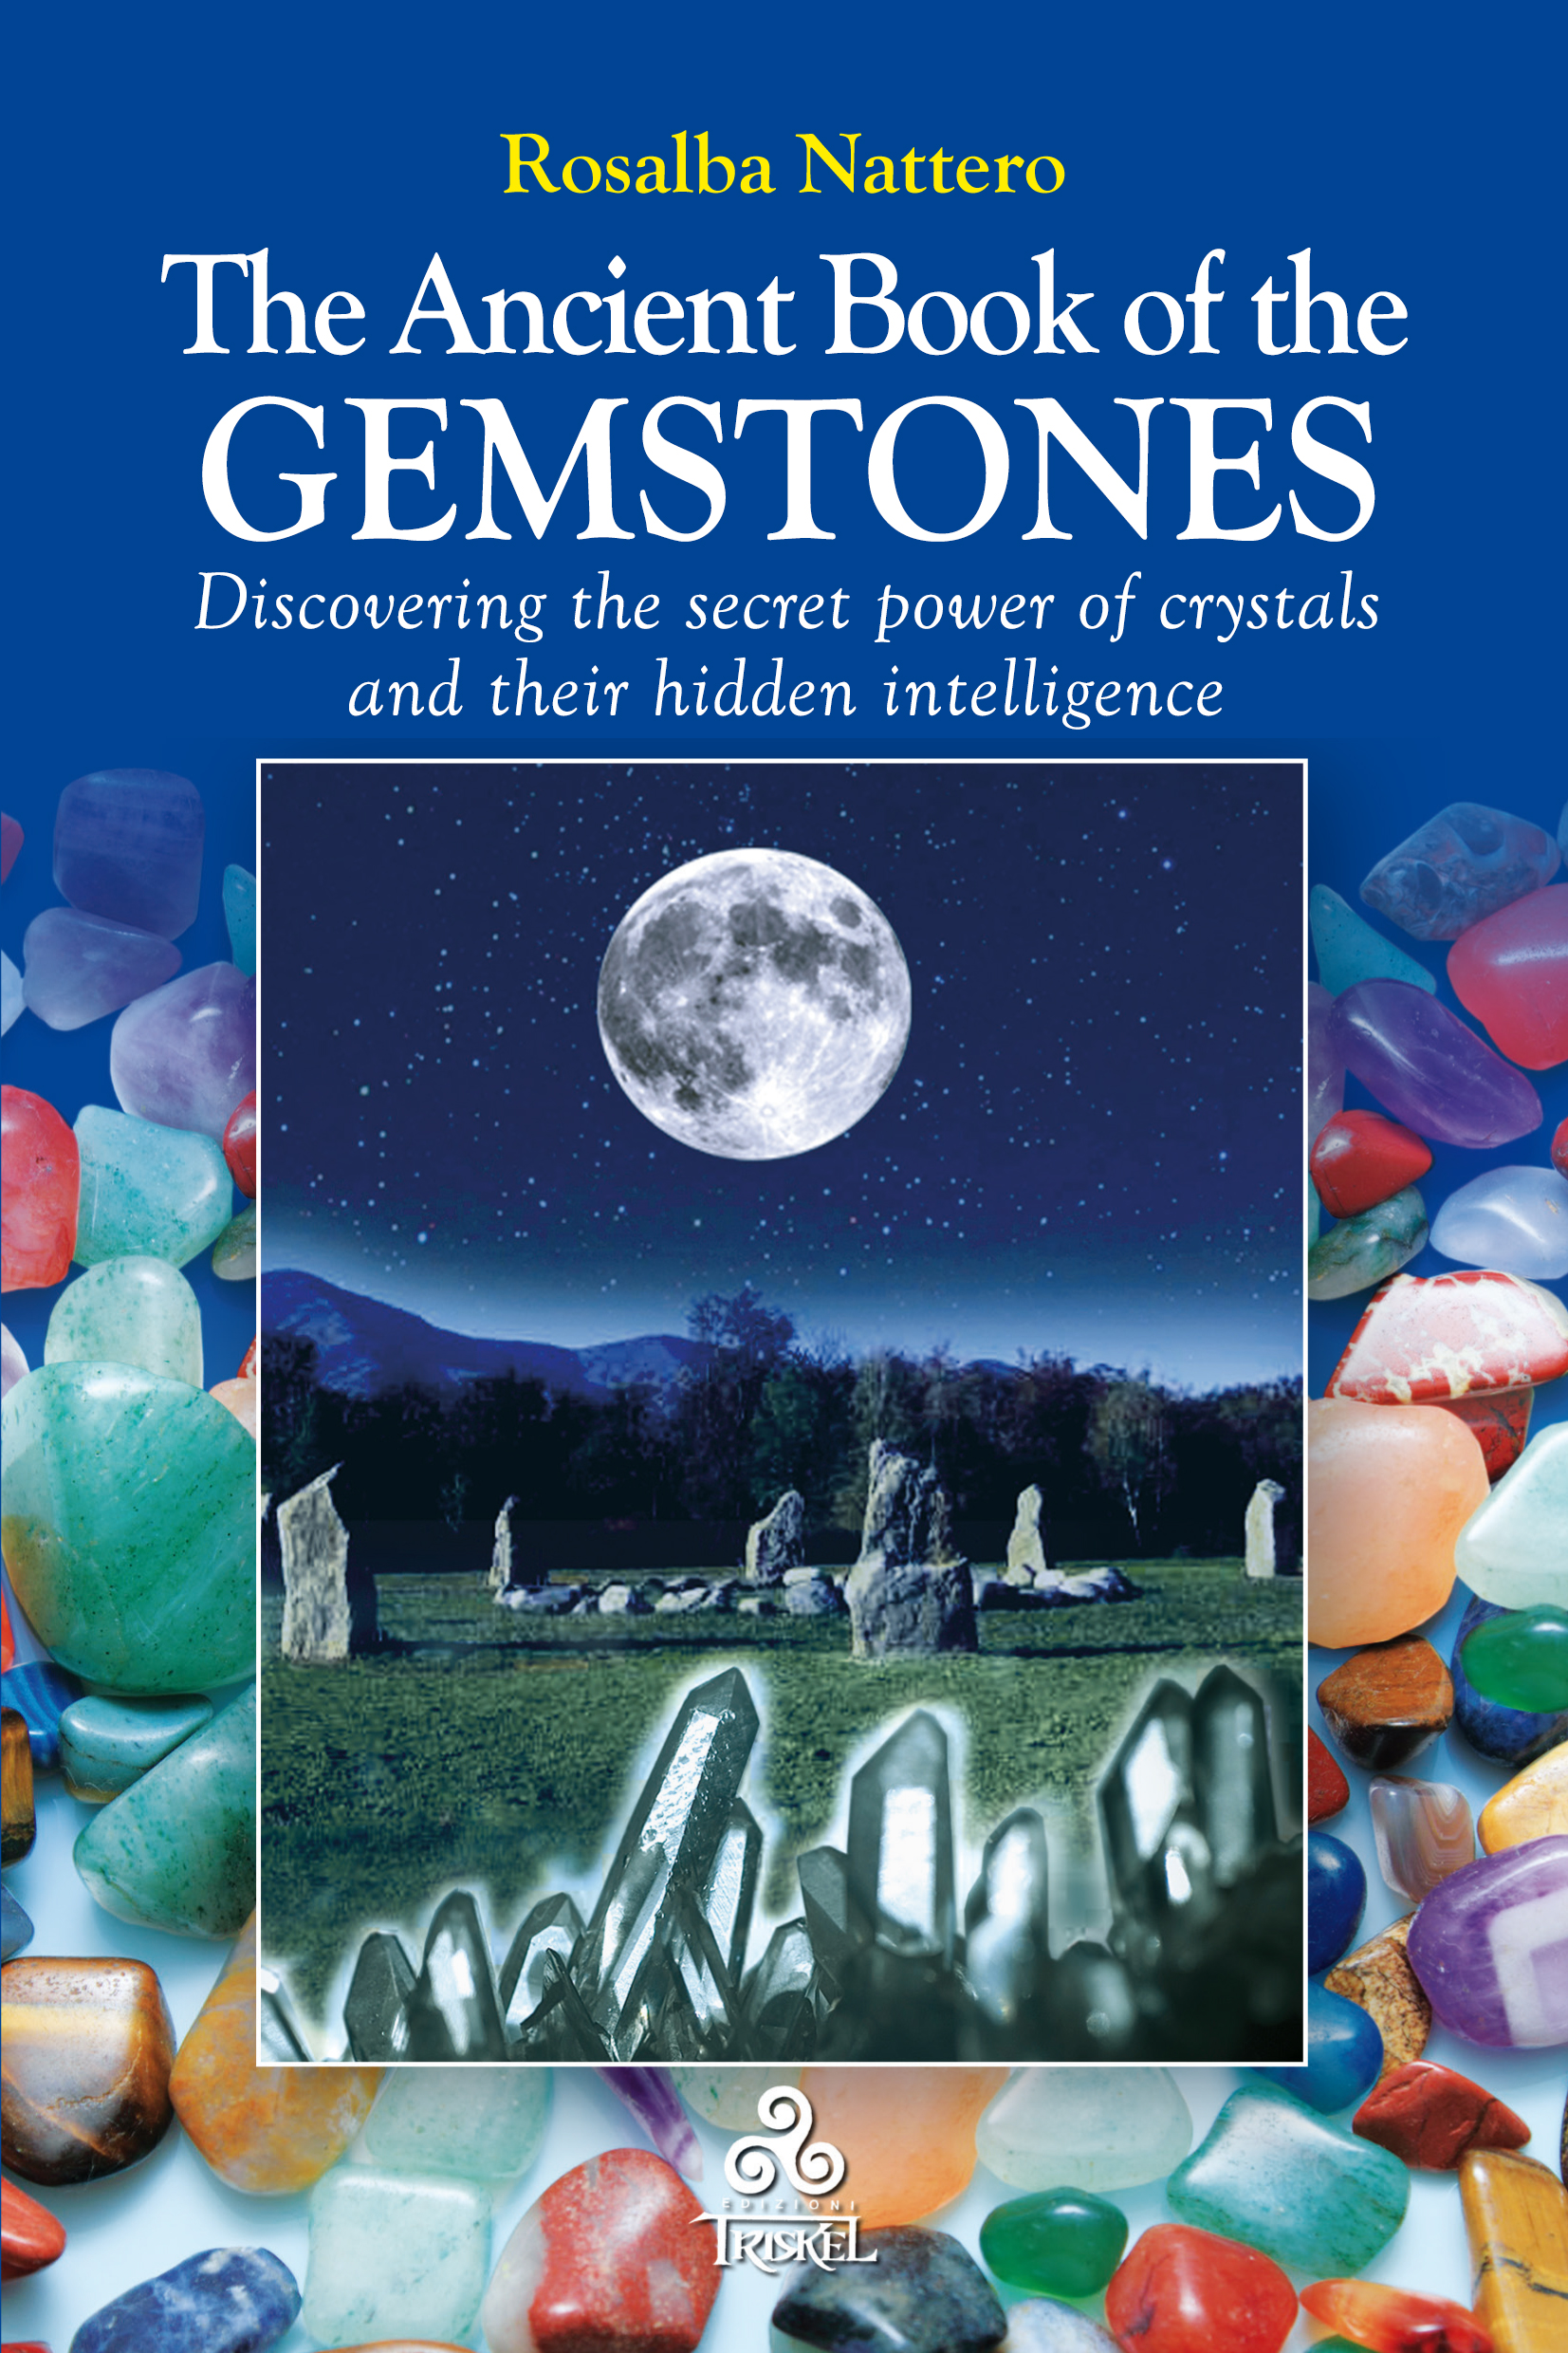 The Ancient Book of the Gemstone